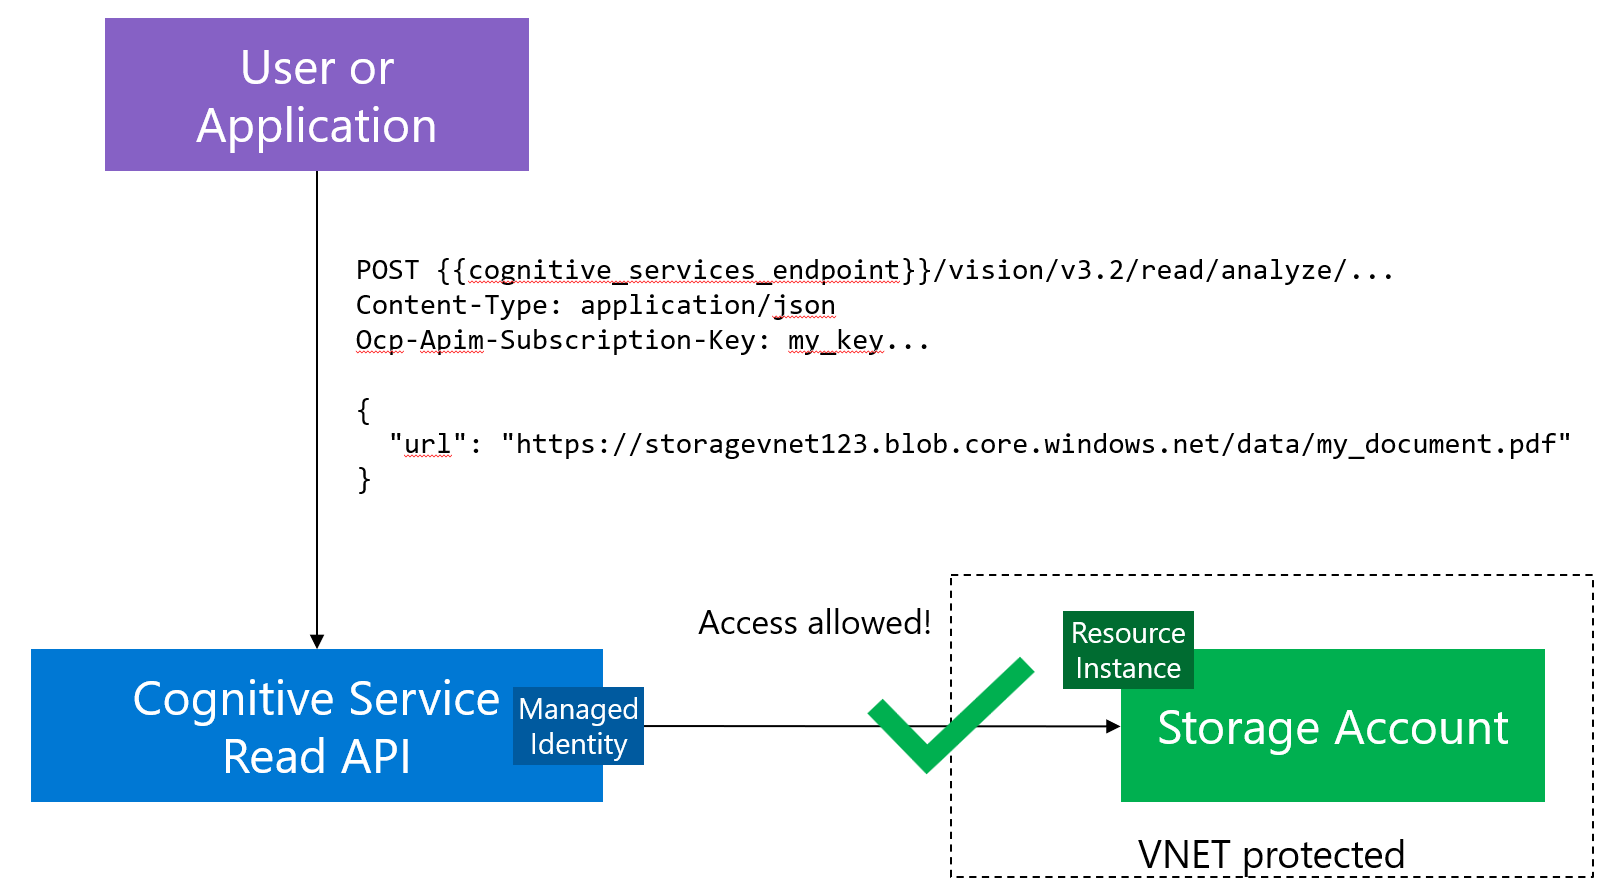 Read API can access the storage account using its Managed Identity